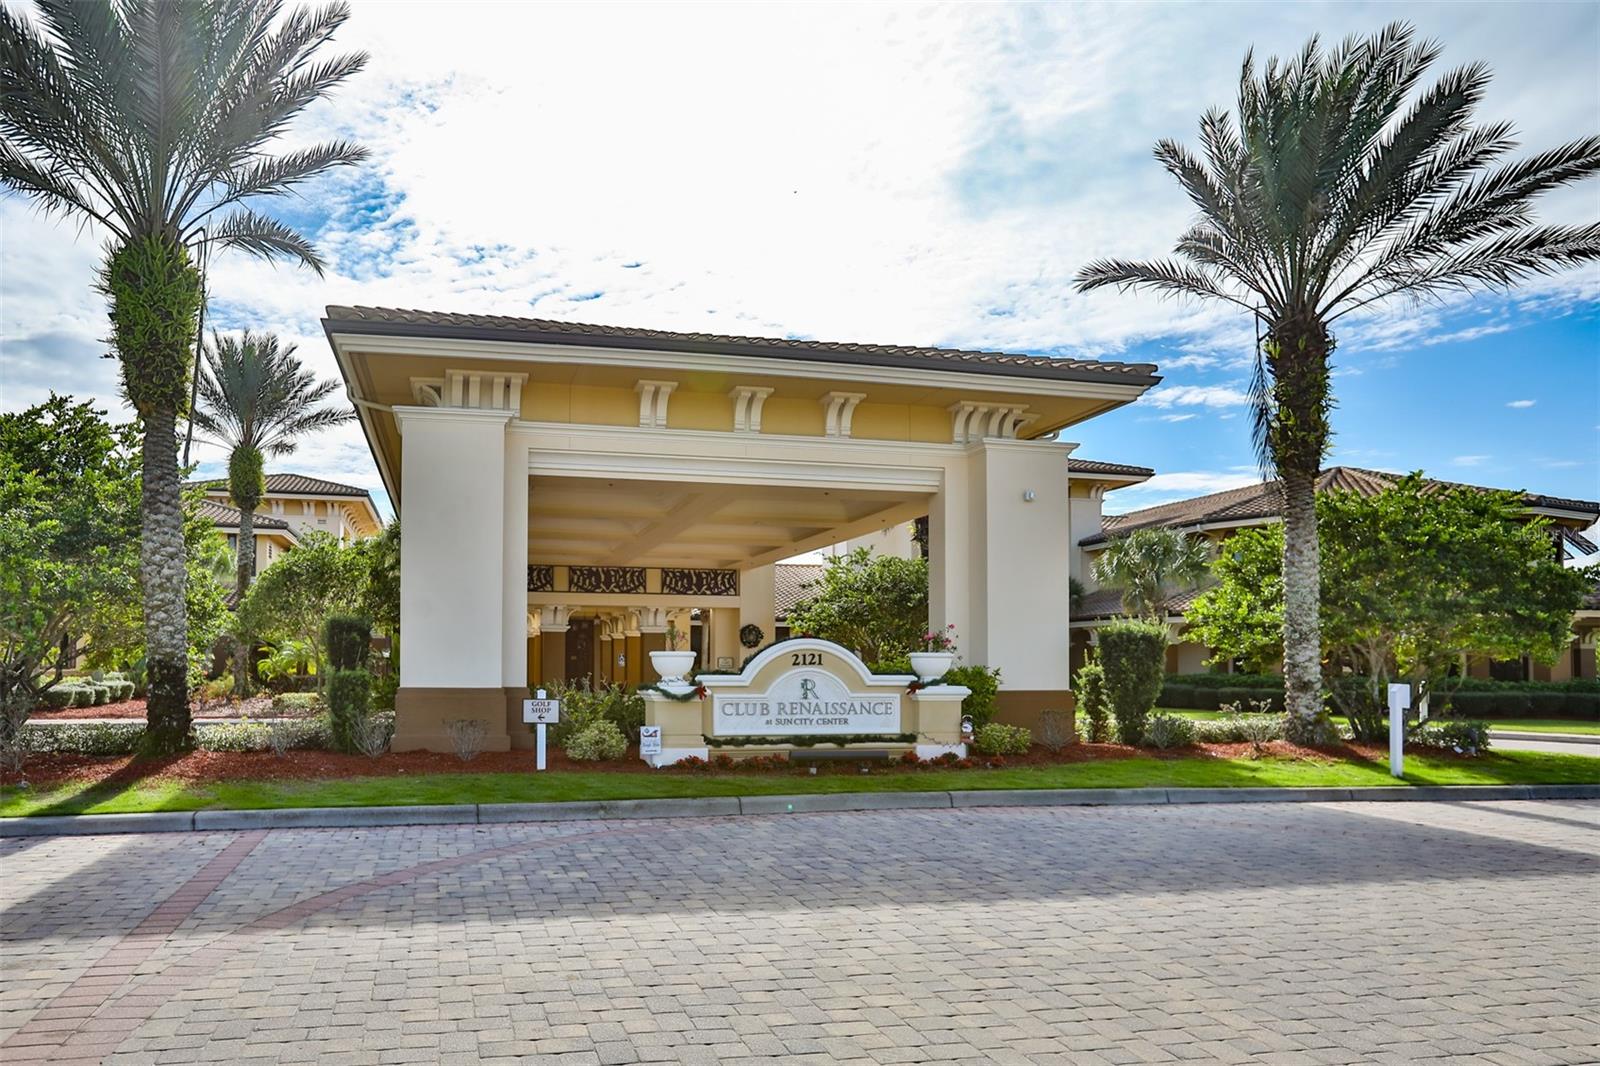 Club Renaissance is complemented by a magnificent Mediterranean-style clubhouse. The full-service facility includes an expansive golf shop, swimming pool, sports bar, spa, fitness center, indoor walking track, and an outstanding restaurant.